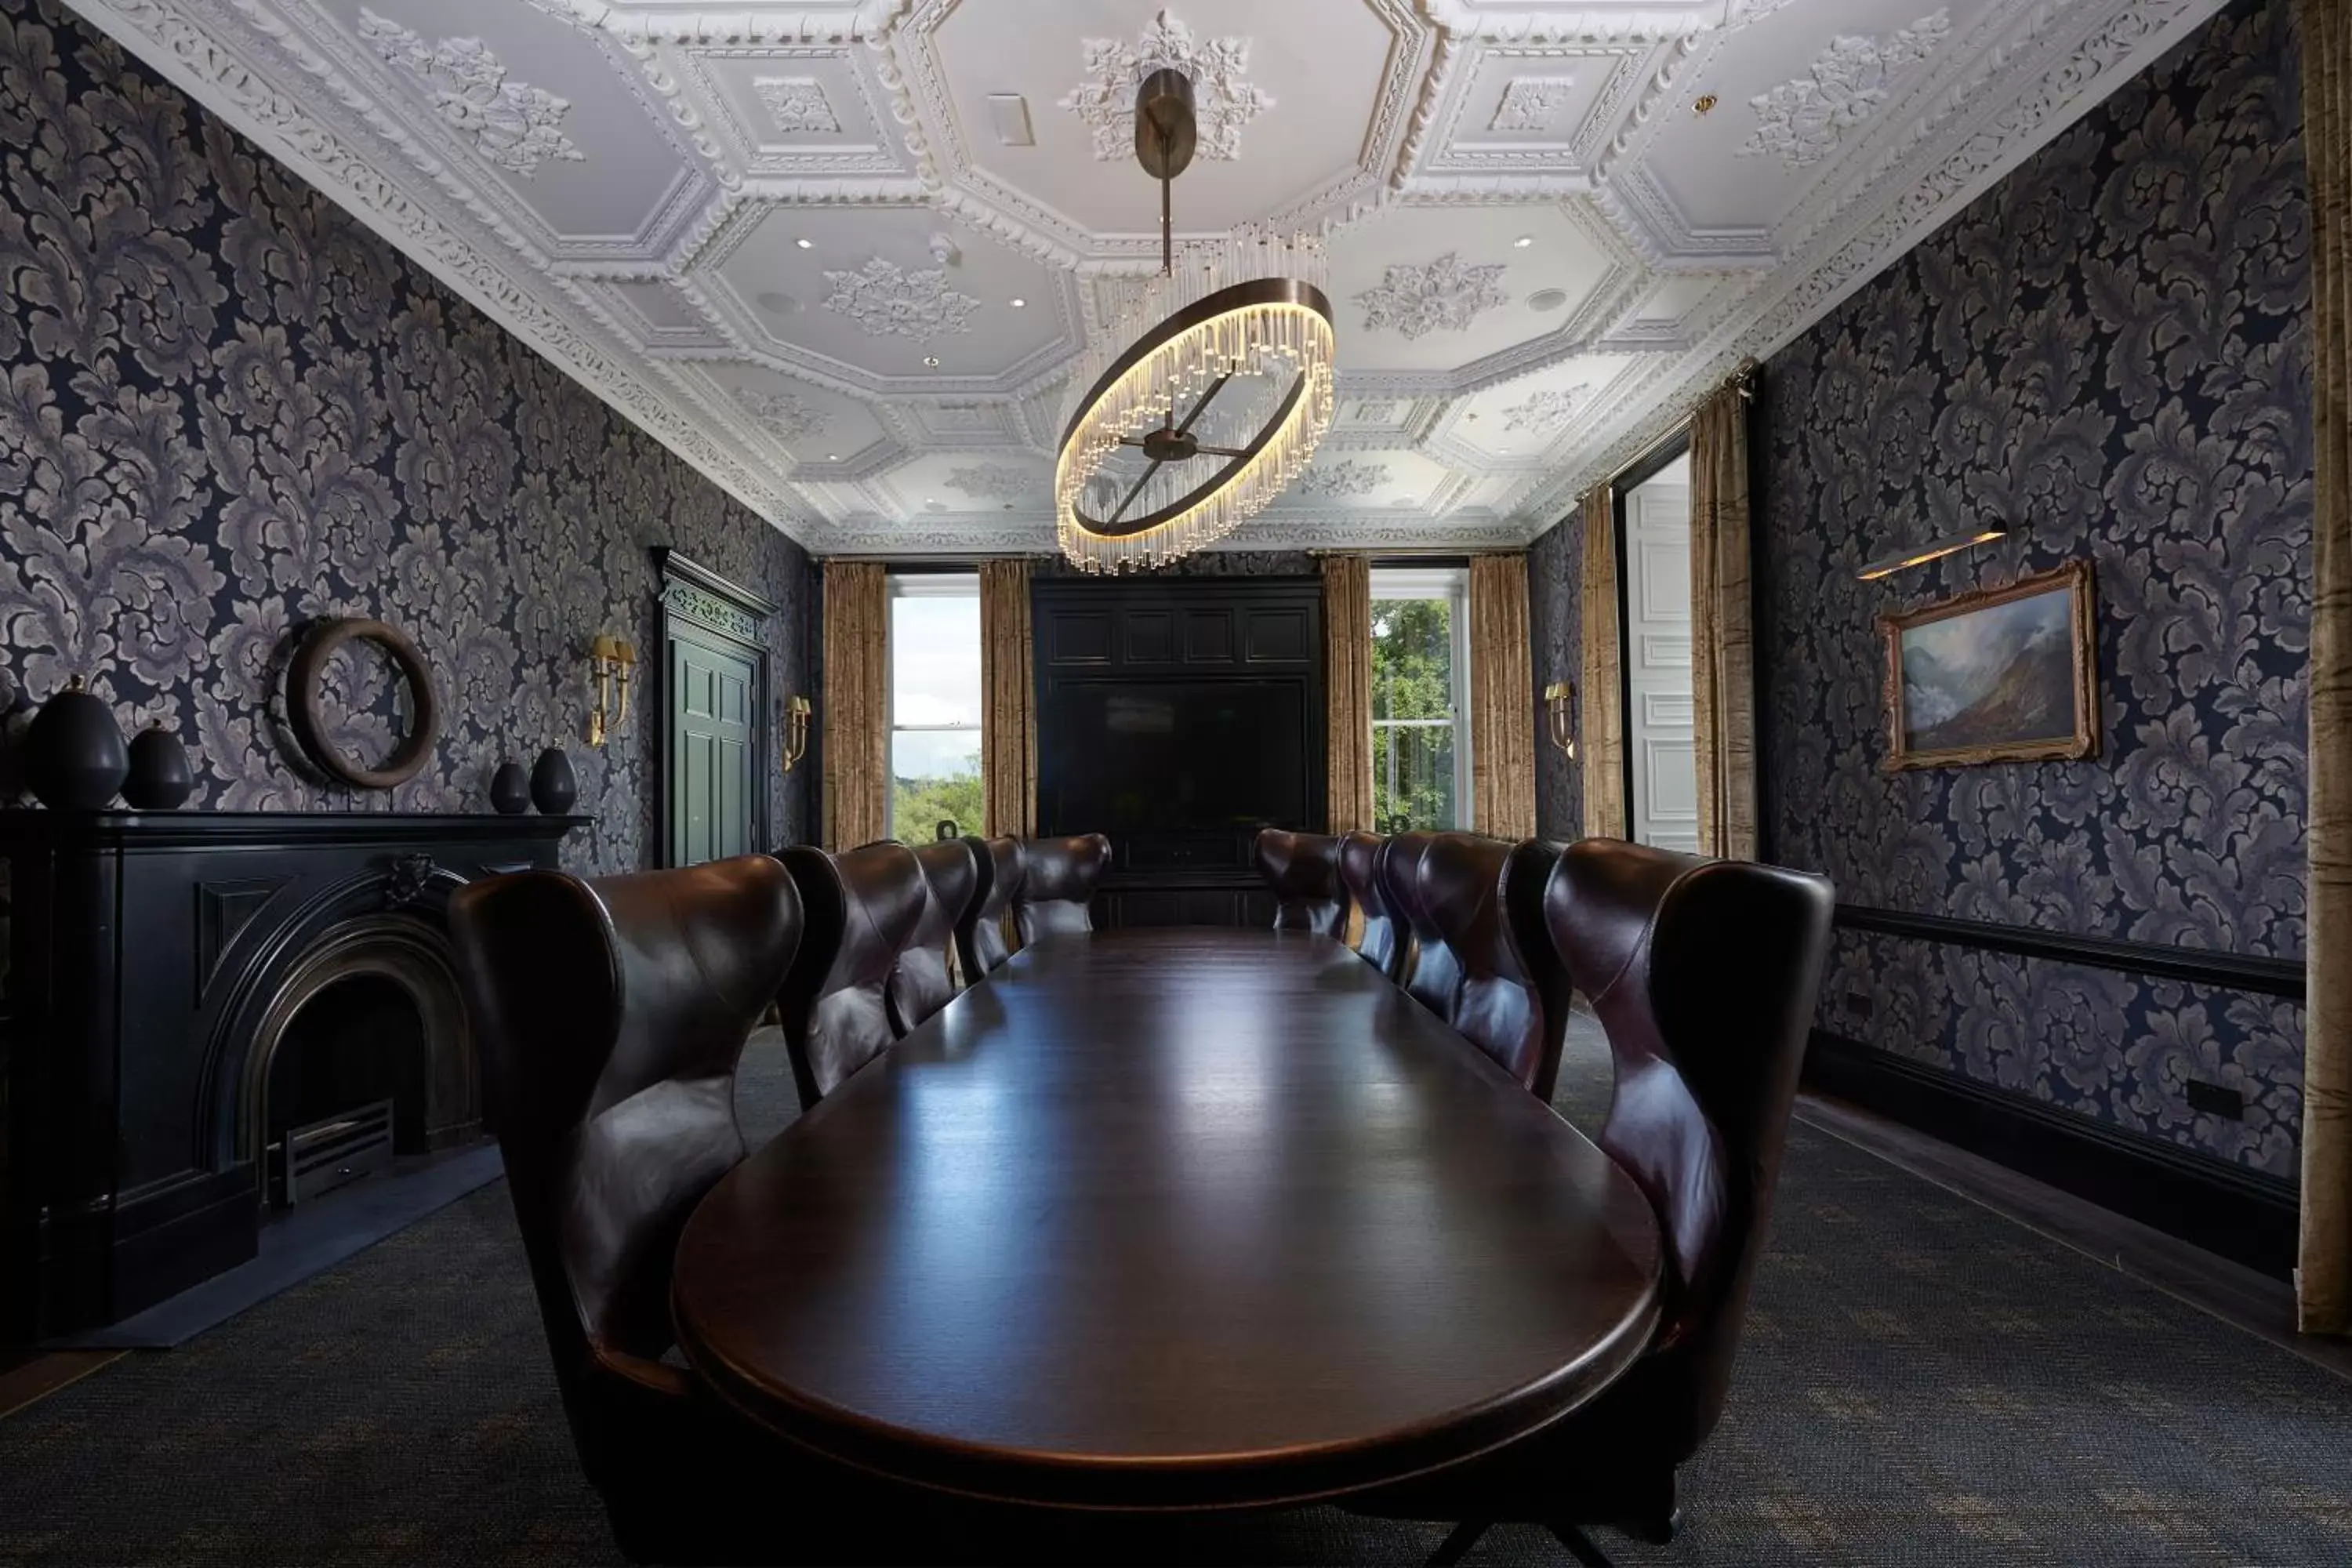 Meeting/conference room in Cameron House on Loch Lomond